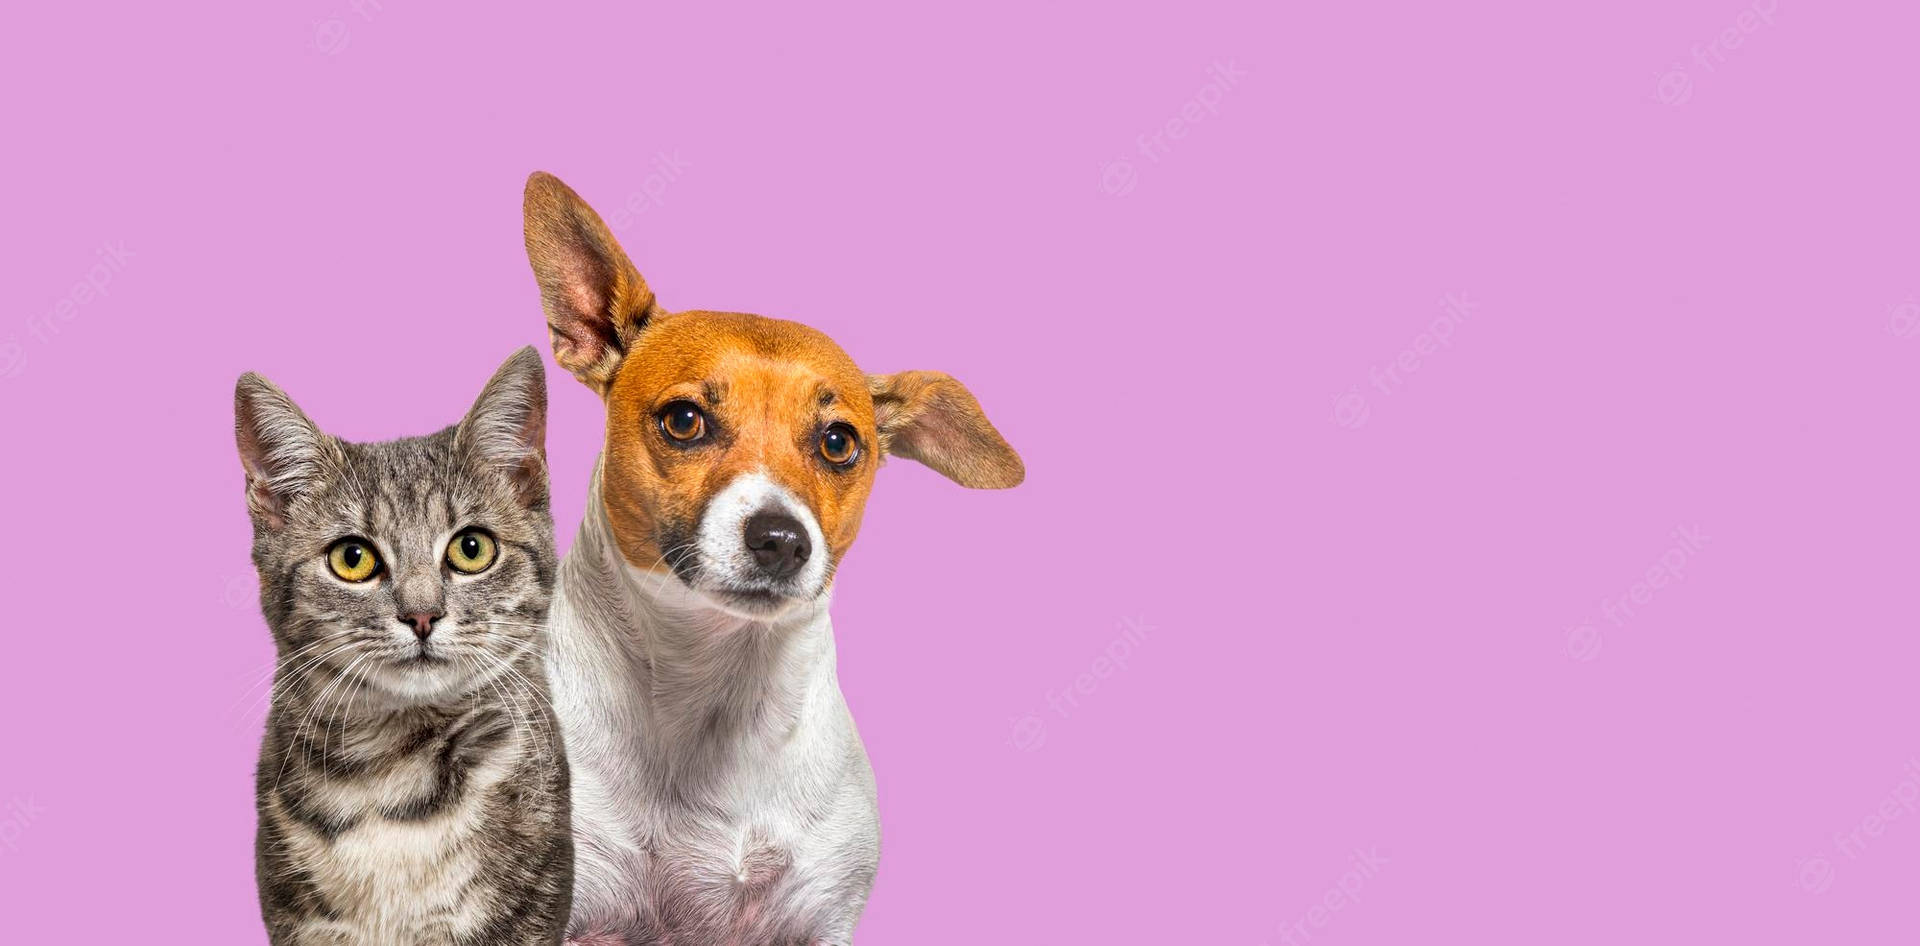 Cat And Dog On Pink Wallpaper